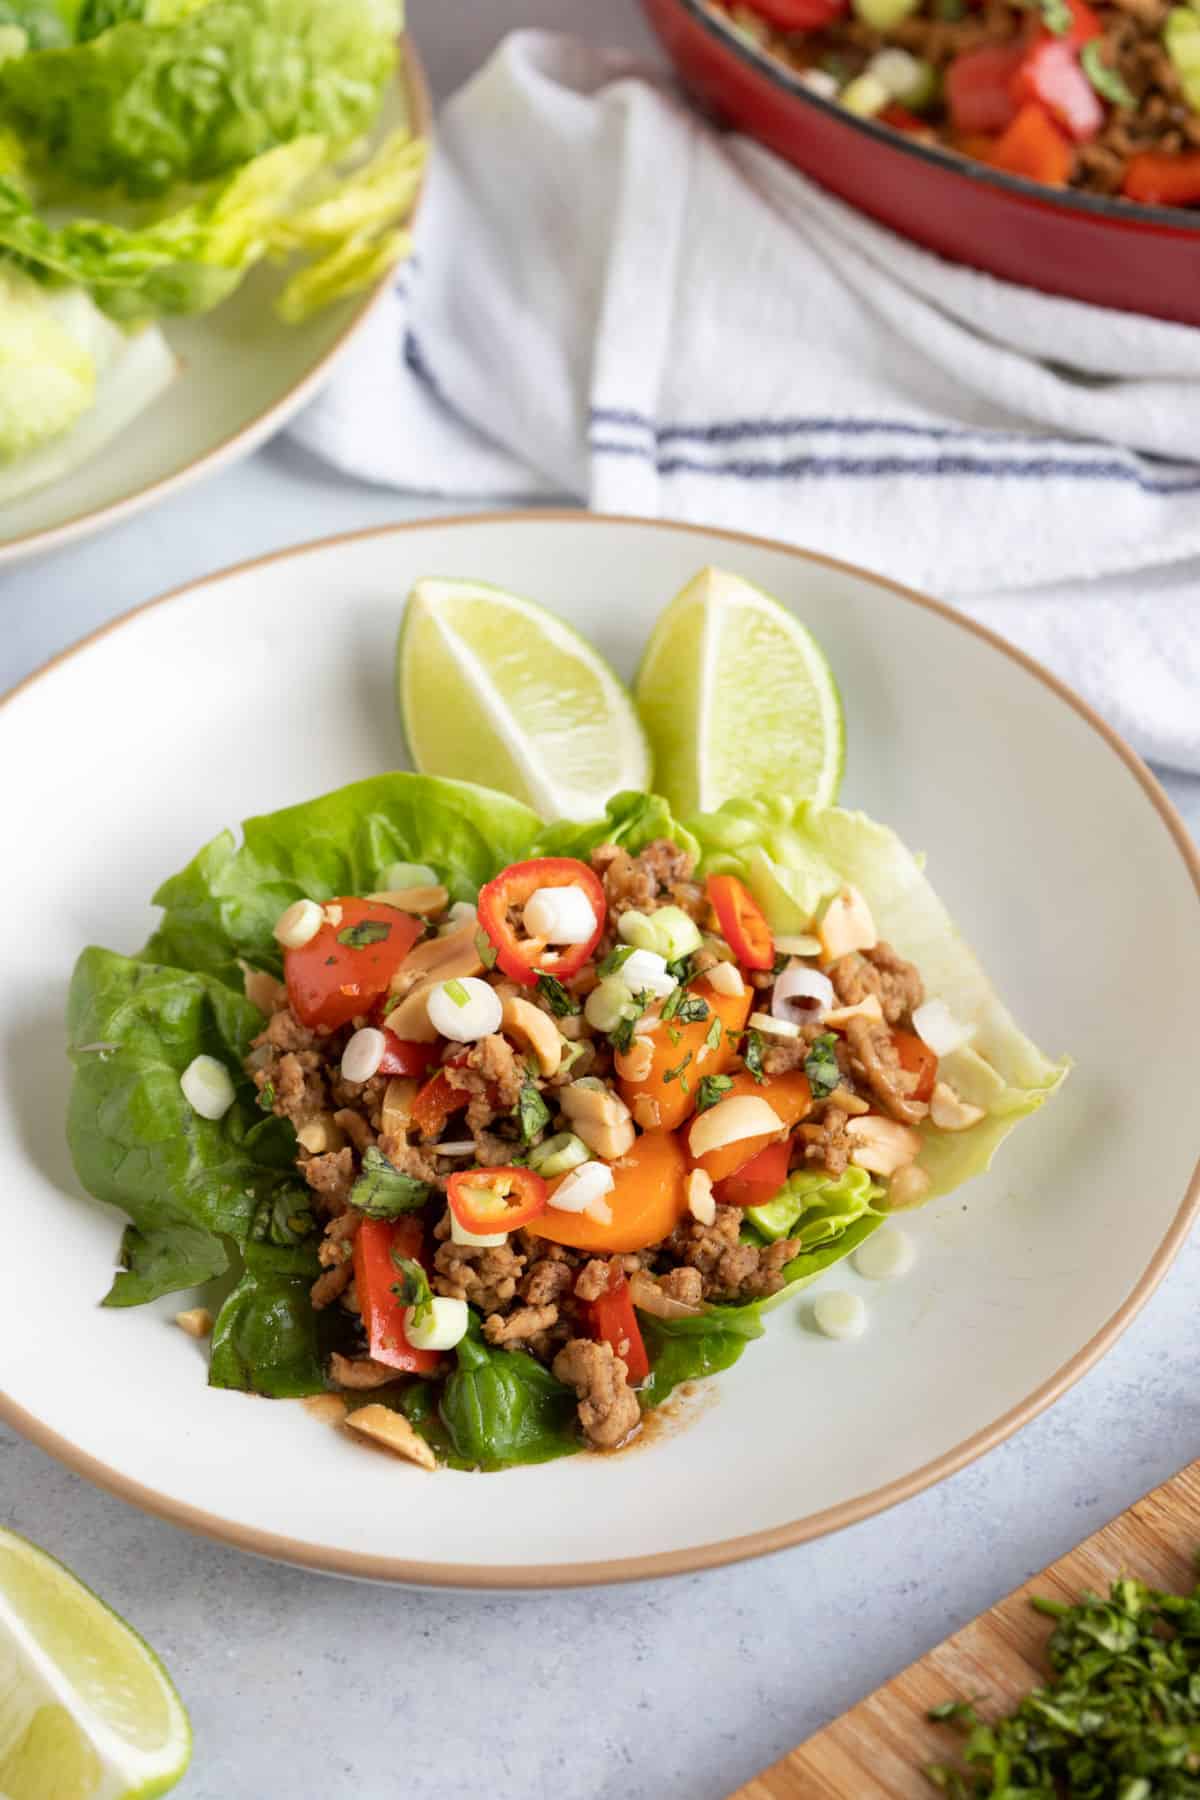 Chinese lettuce wraps on a plate filled with stir-fried pork mince.